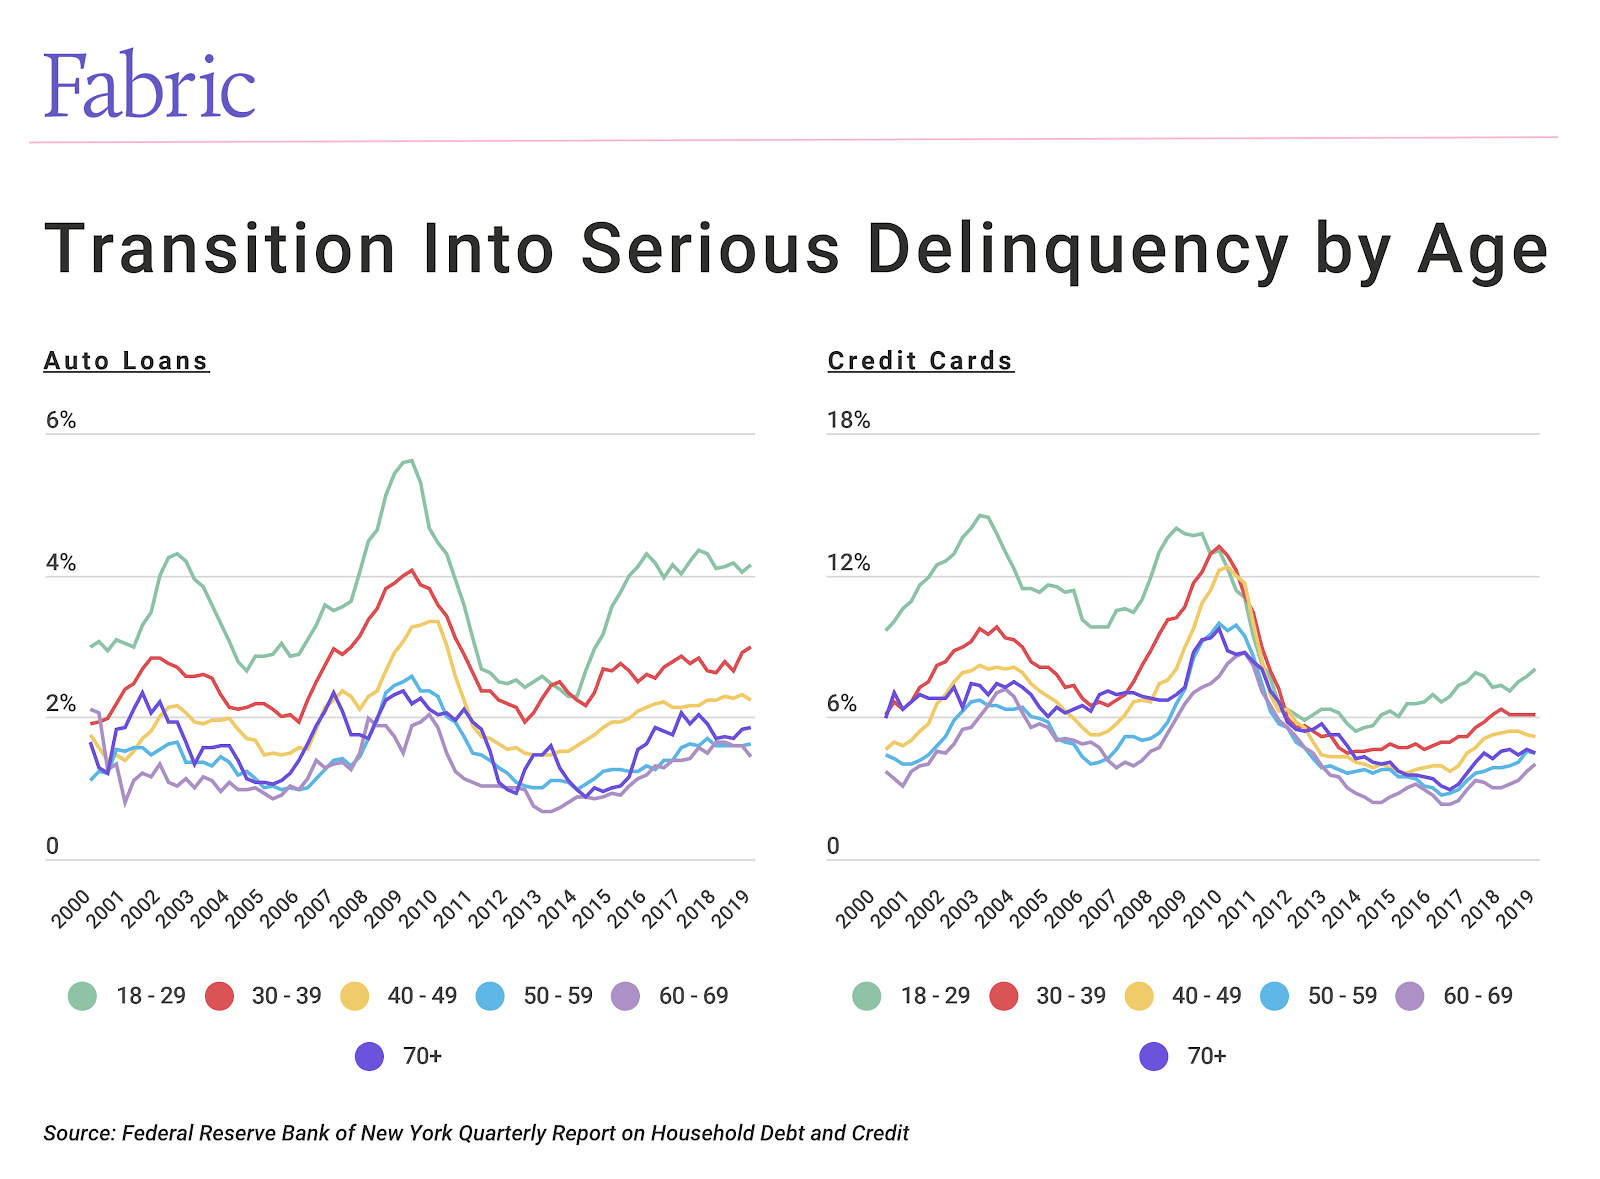 graph depicting what percent of people are in serious delinquency on their auto loans and credit cards by age